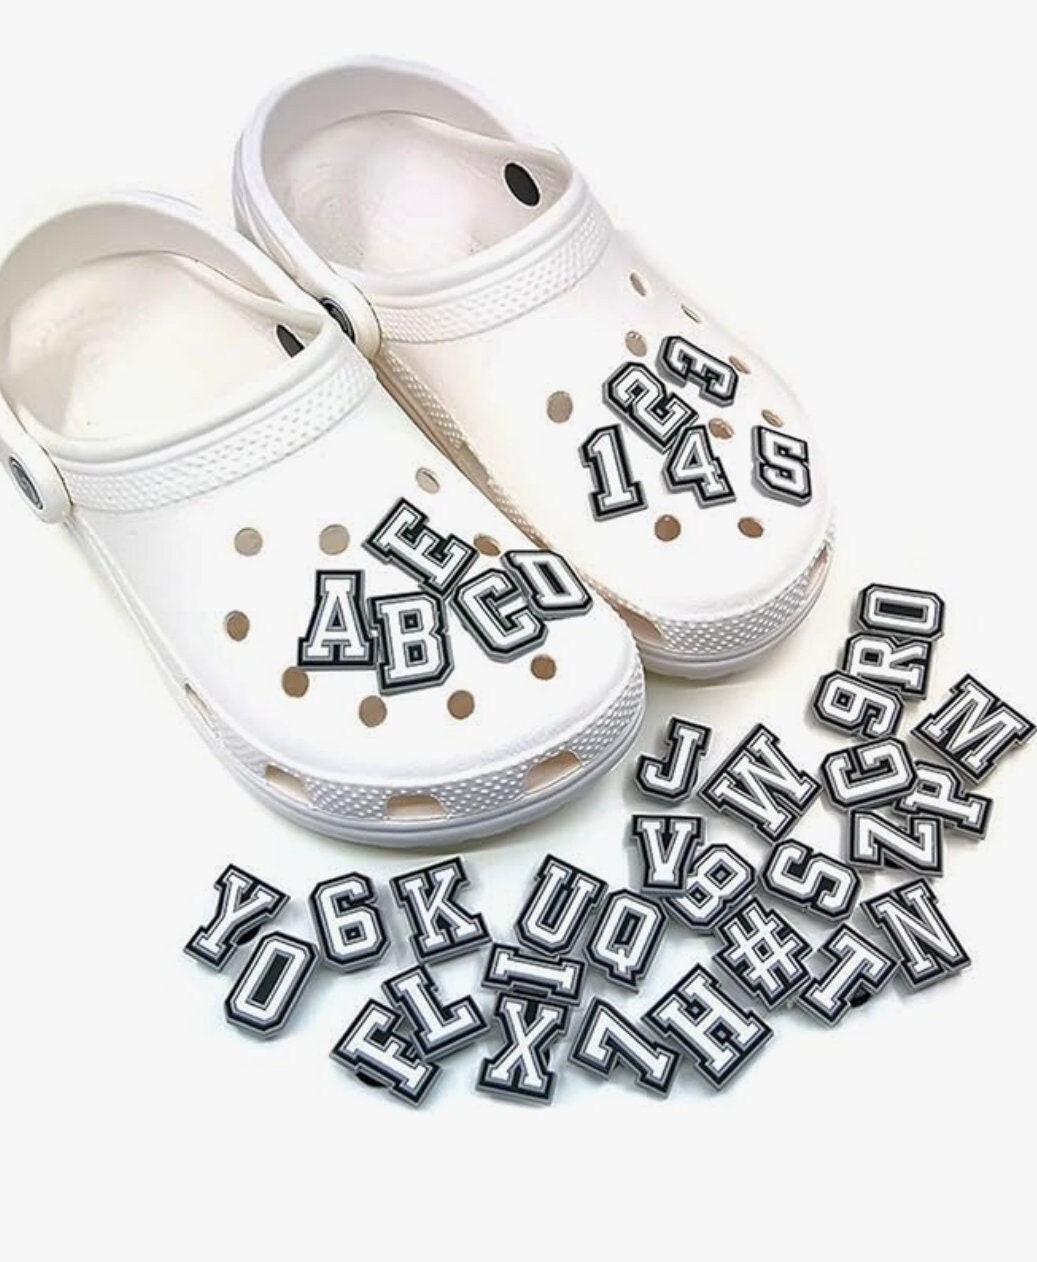 Letter and Number Charms for Croc - Personalized | Unique Gifts for All Occasions